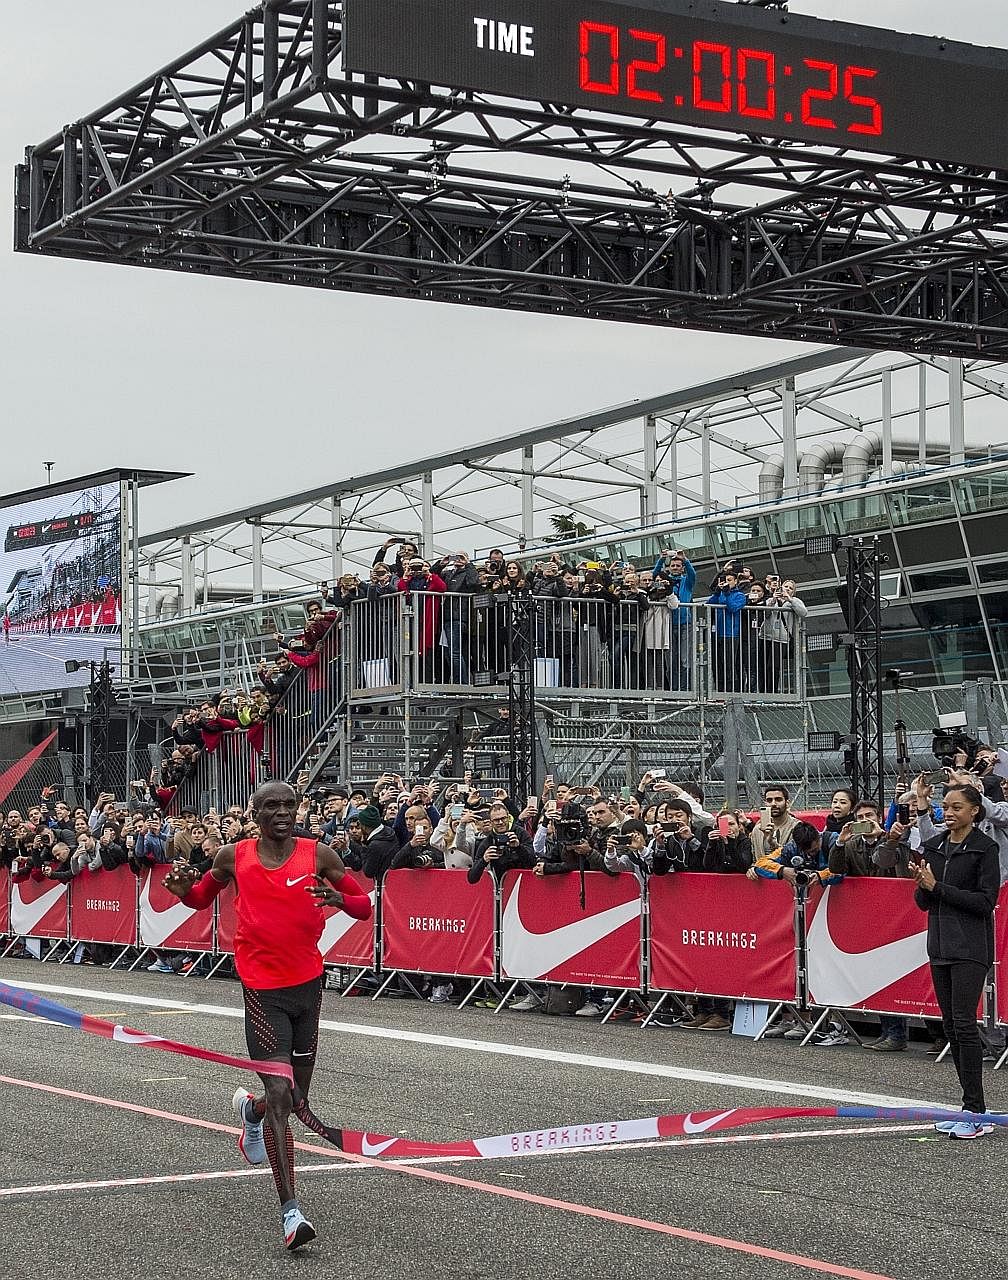 Marathon runner Eliud Kipchoge crossing the finish line at the Monza Formula One track in two hours and 25 seconds.